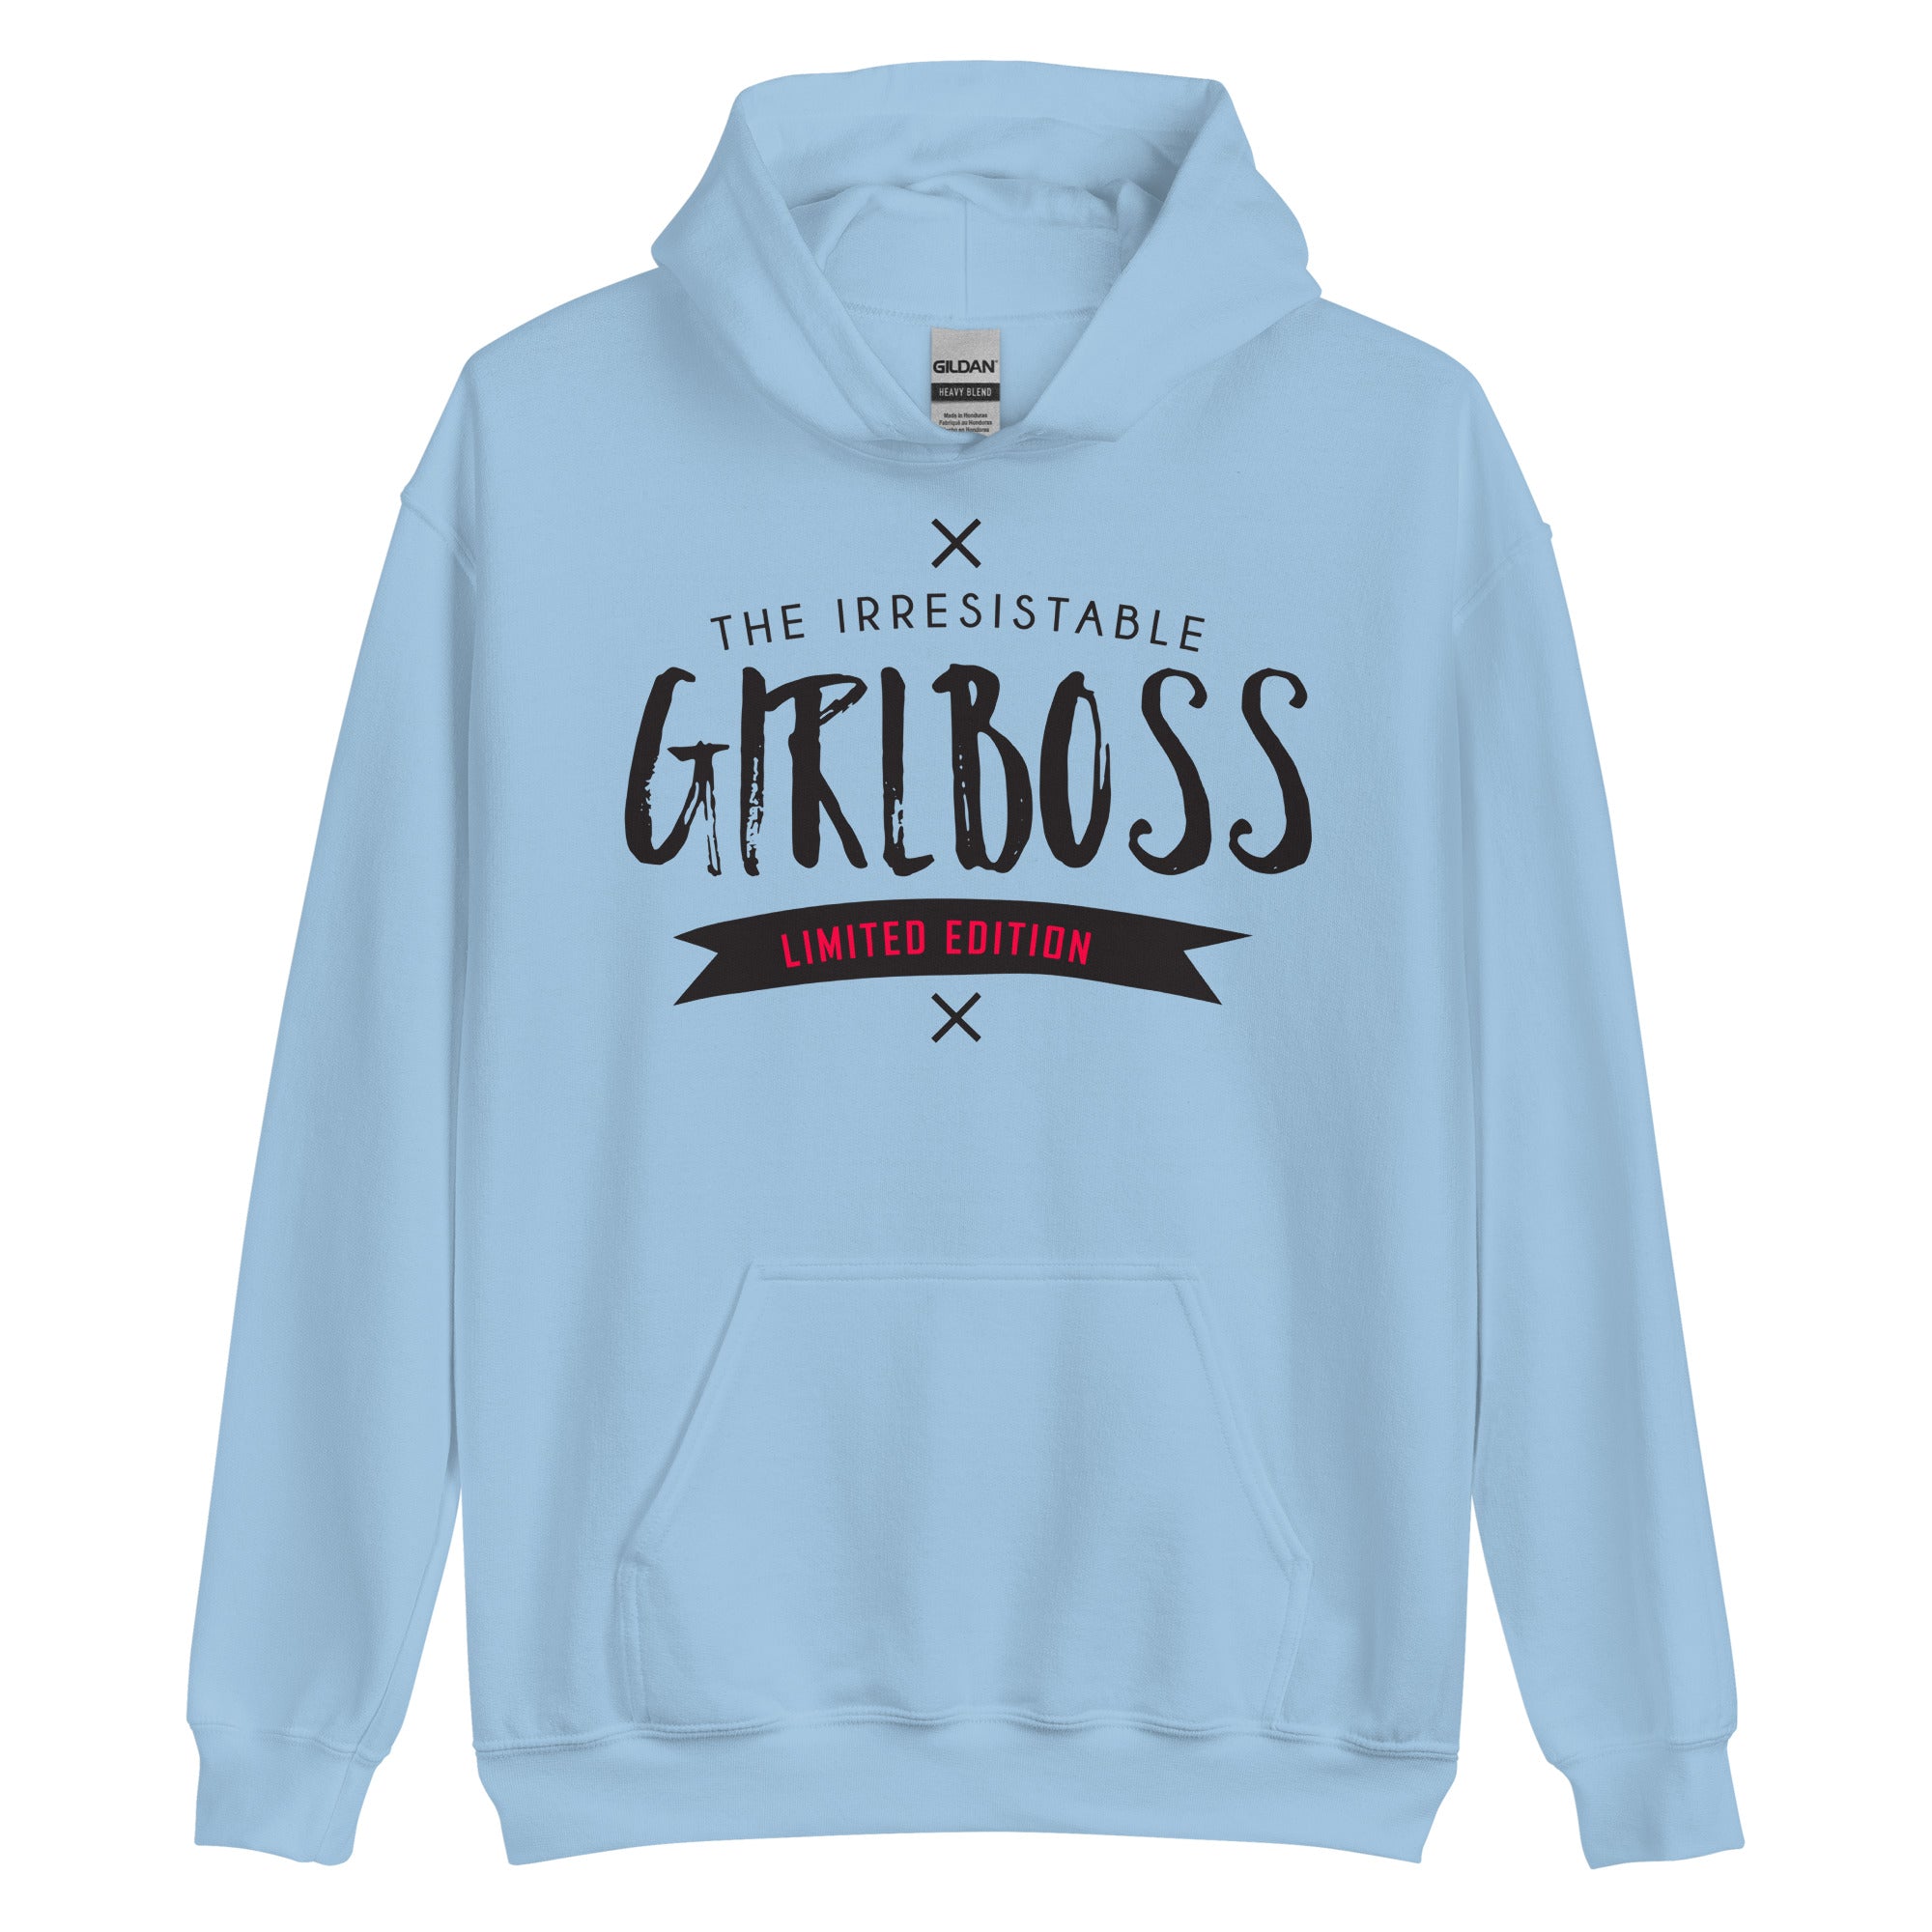 Limited Edition The Irresistable Girl Boss Hoodie for Women